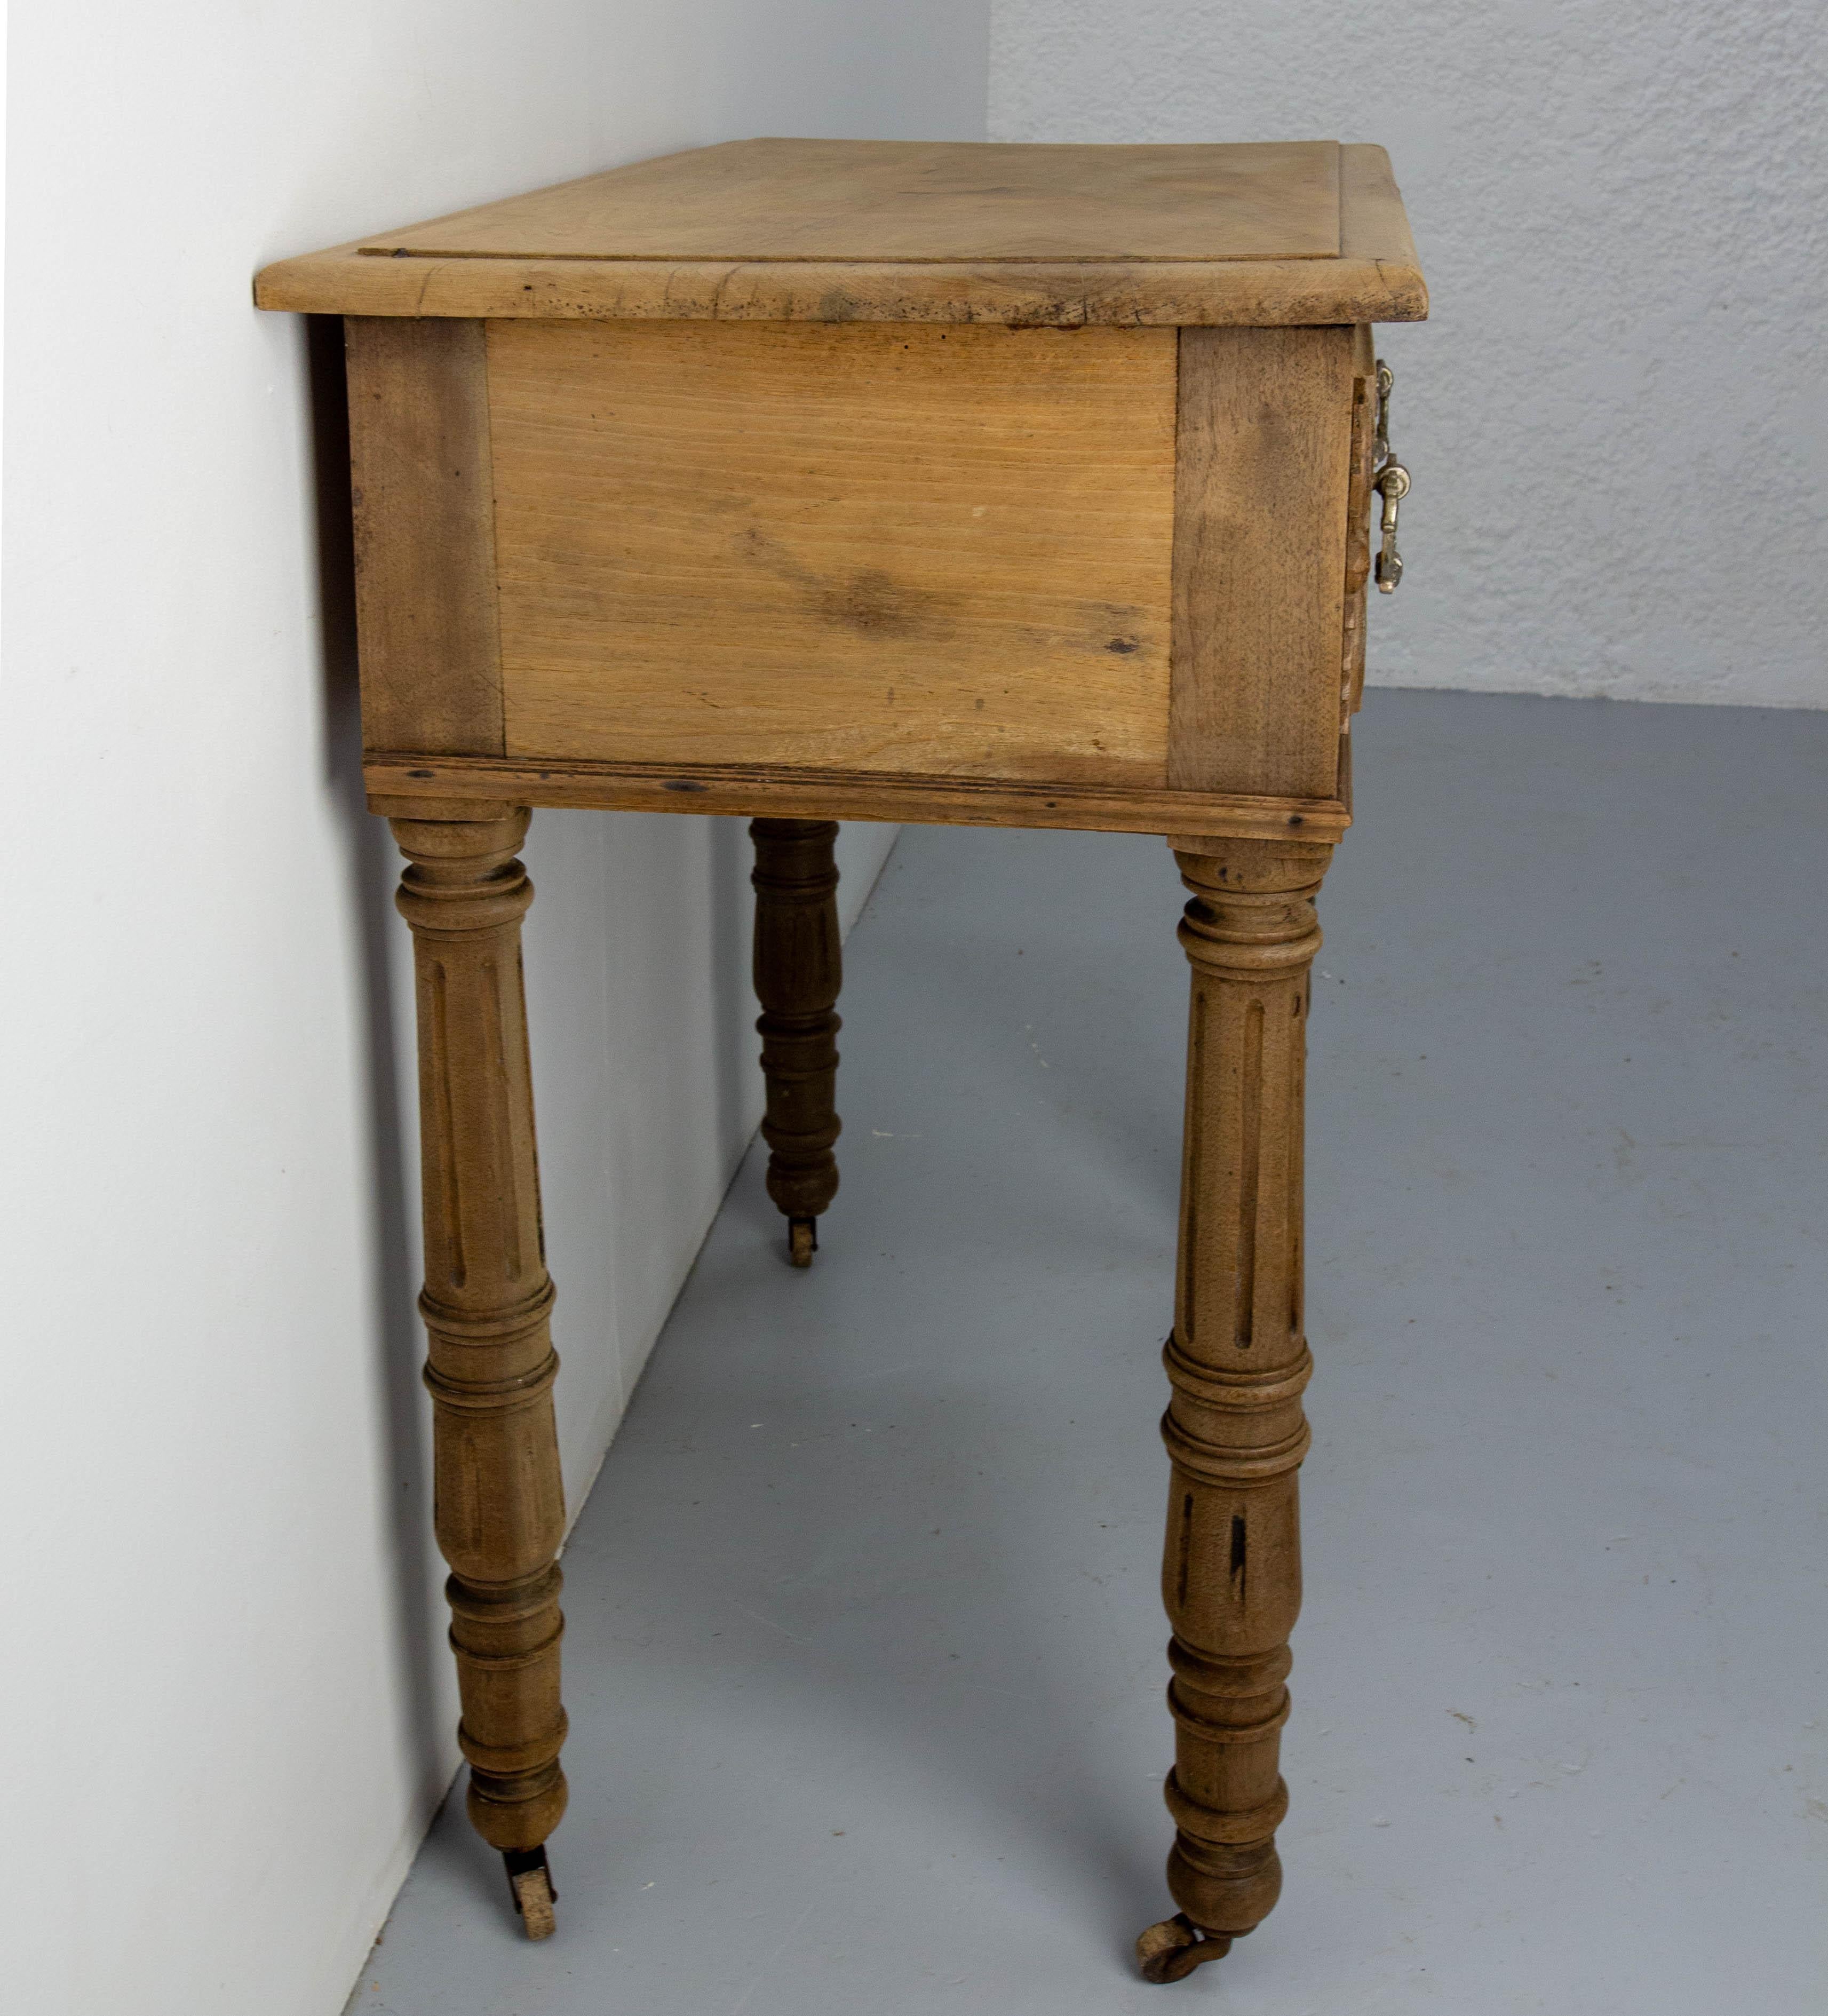 French 19th Century Writing Table on Wheels Carved Walnut Desk English Style In Good Condition For Sale In Labrit, Landes